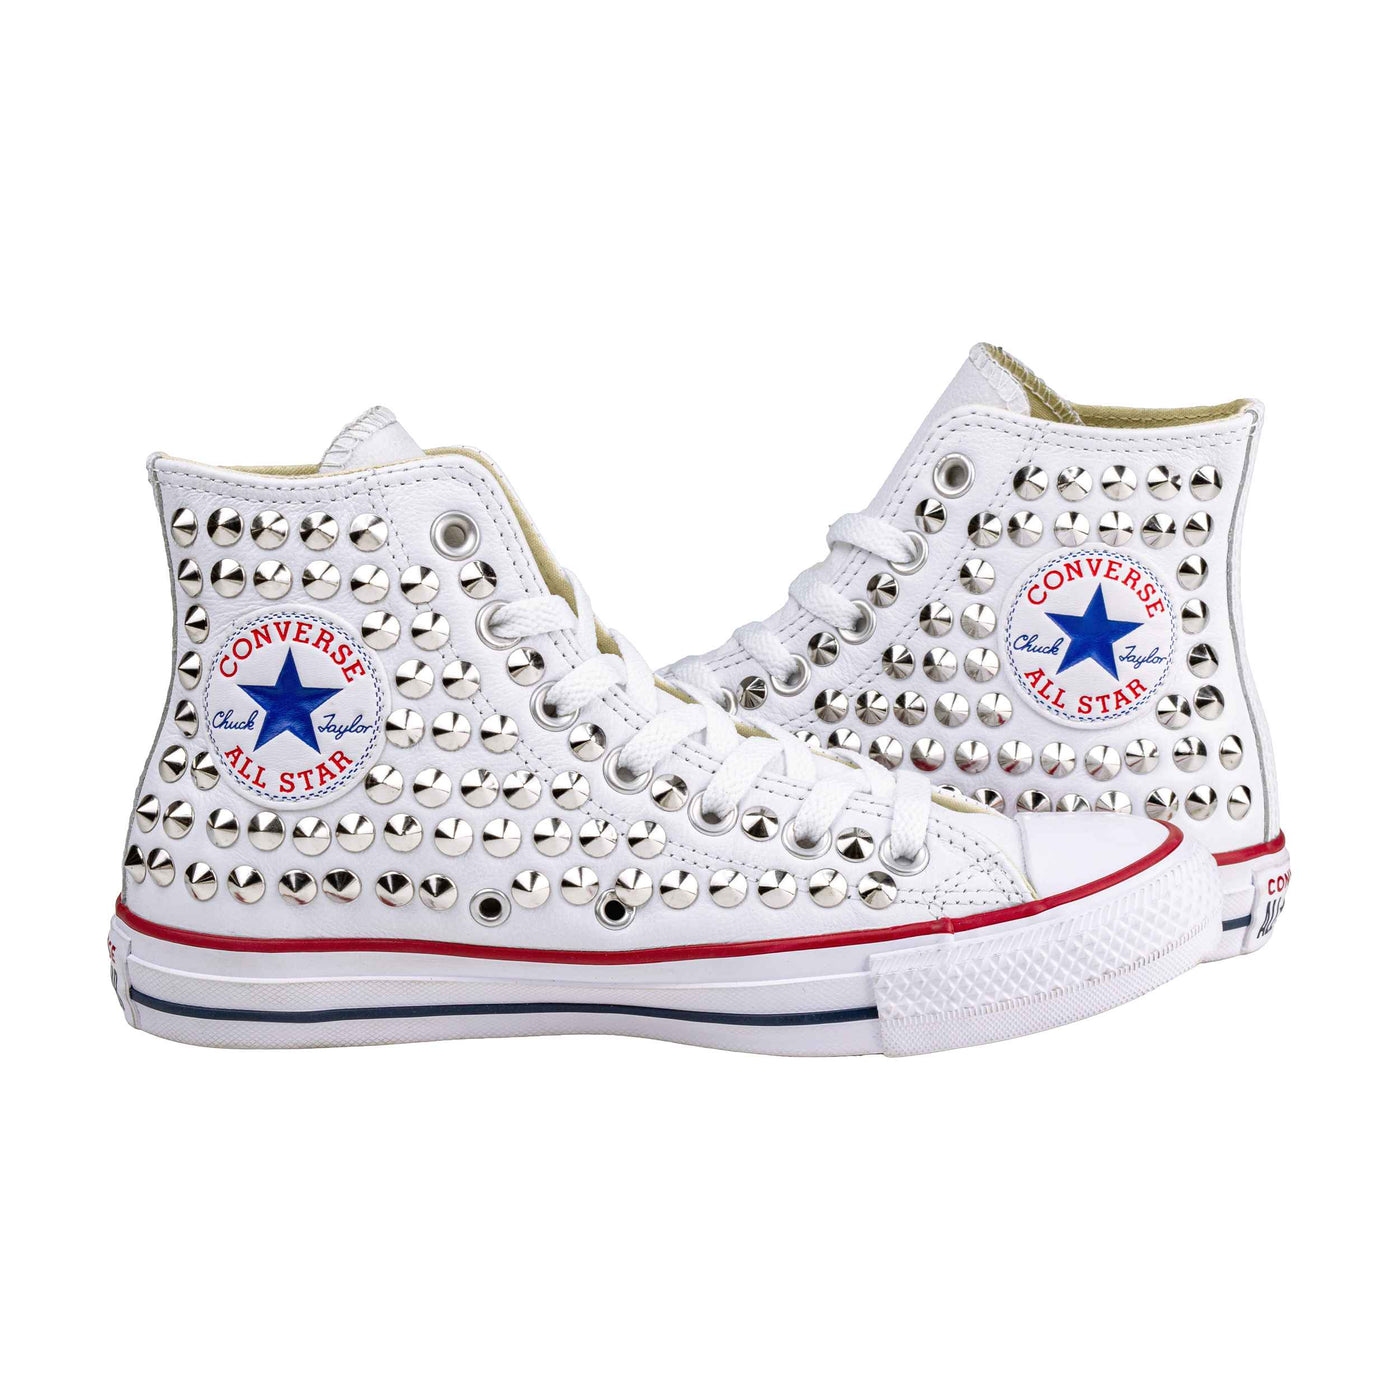 CONVERSE PERSONALIZZATE BIANCA IN PELLE MEYER